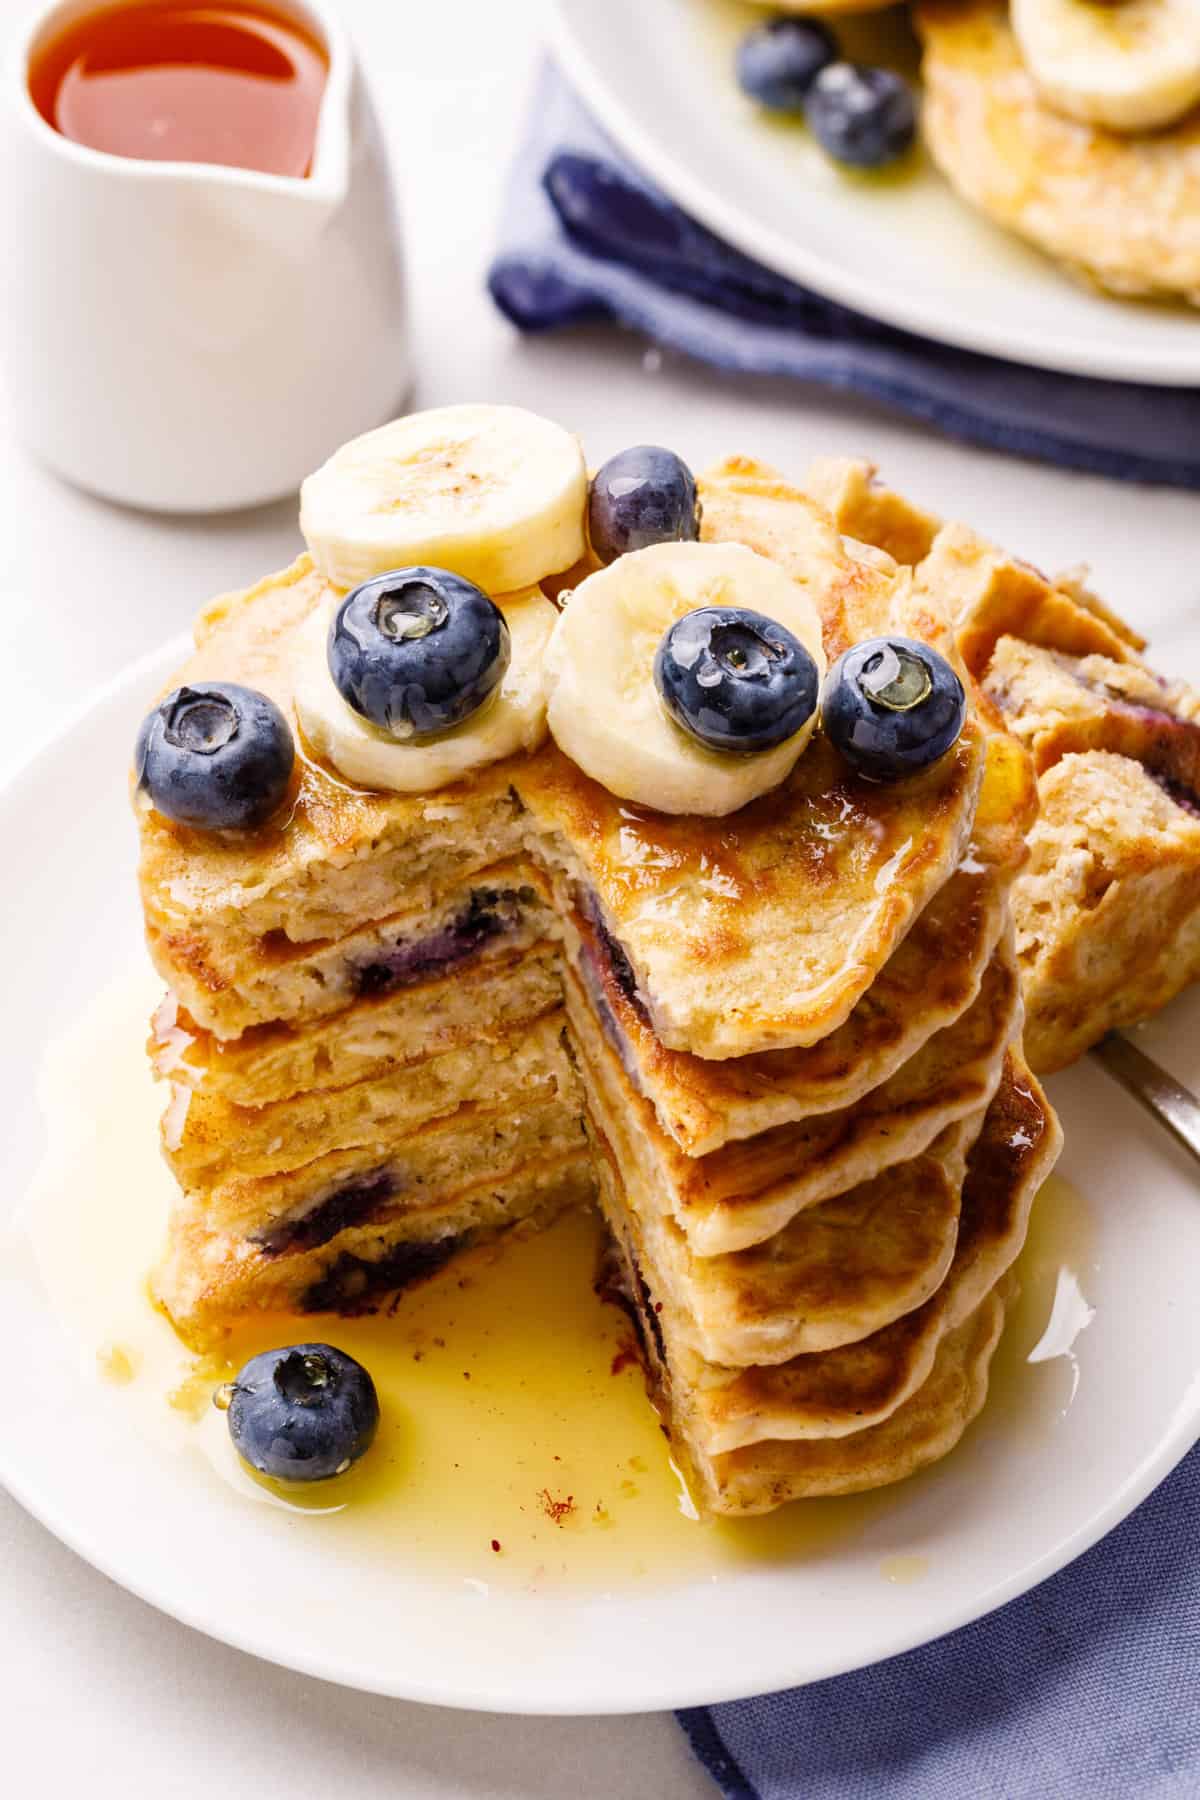 stack of oatmeal pancakes topped with fresh sliced bananas and blueberries with maple syrup, cut into to show the cross section and served on a white round plate